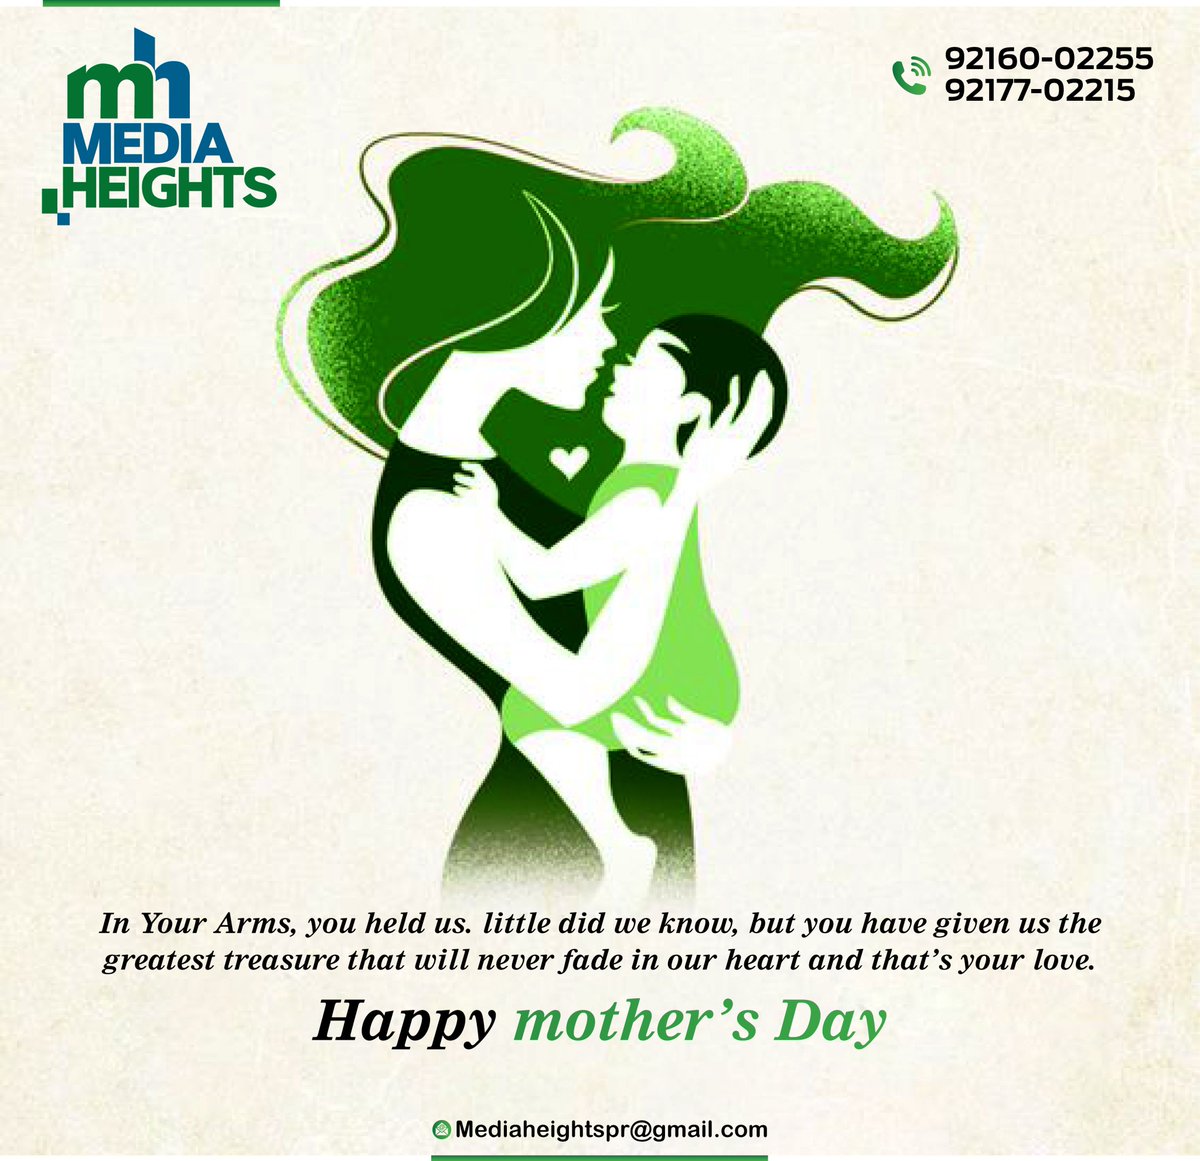 Motherhood is the exquisite inconvenience of being another person’s everything. Build your brand with digital media & take the benefits of social media branding contact Media Heights. By  Mediaheightspr.com  
 #MEDIAHEIGHTS  #advertisingagency  #MEDIAHEIGHTSPRCOM #best